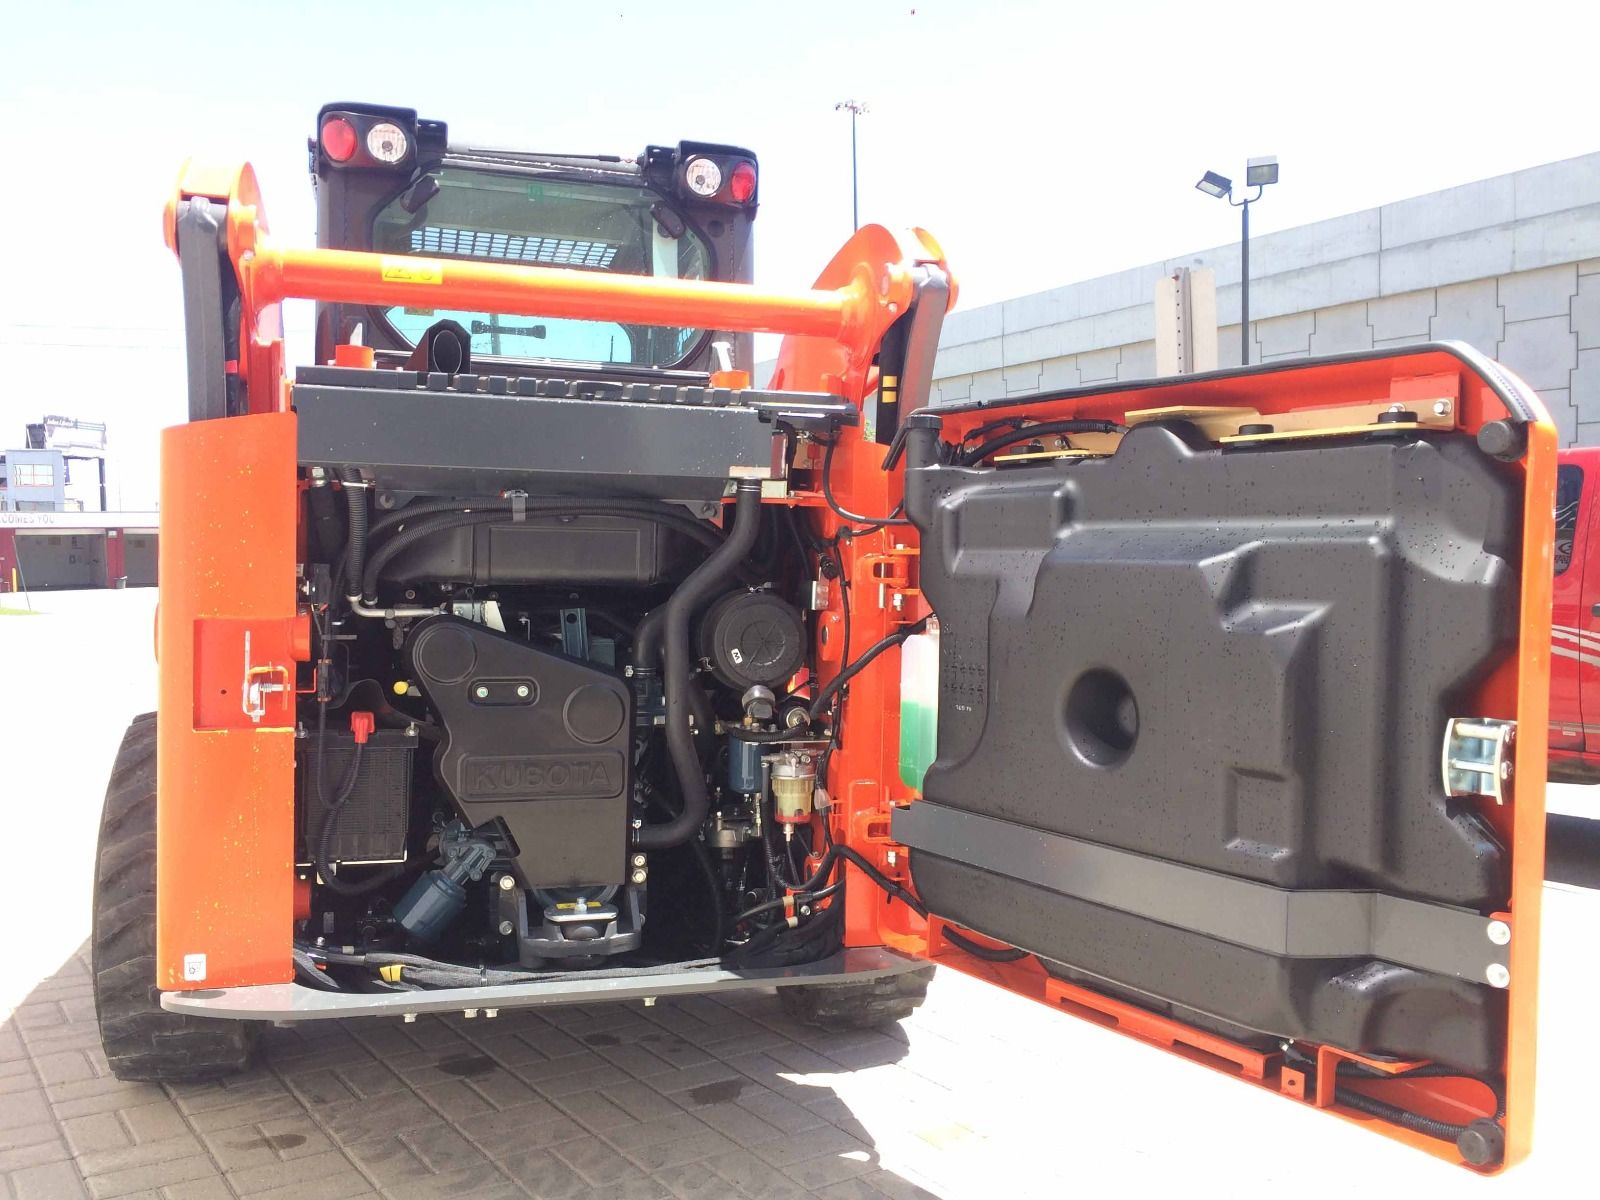 Kubota 64HP Tier 4 diesel engine with common rail system and diesel particulate filter (DPF) muffler